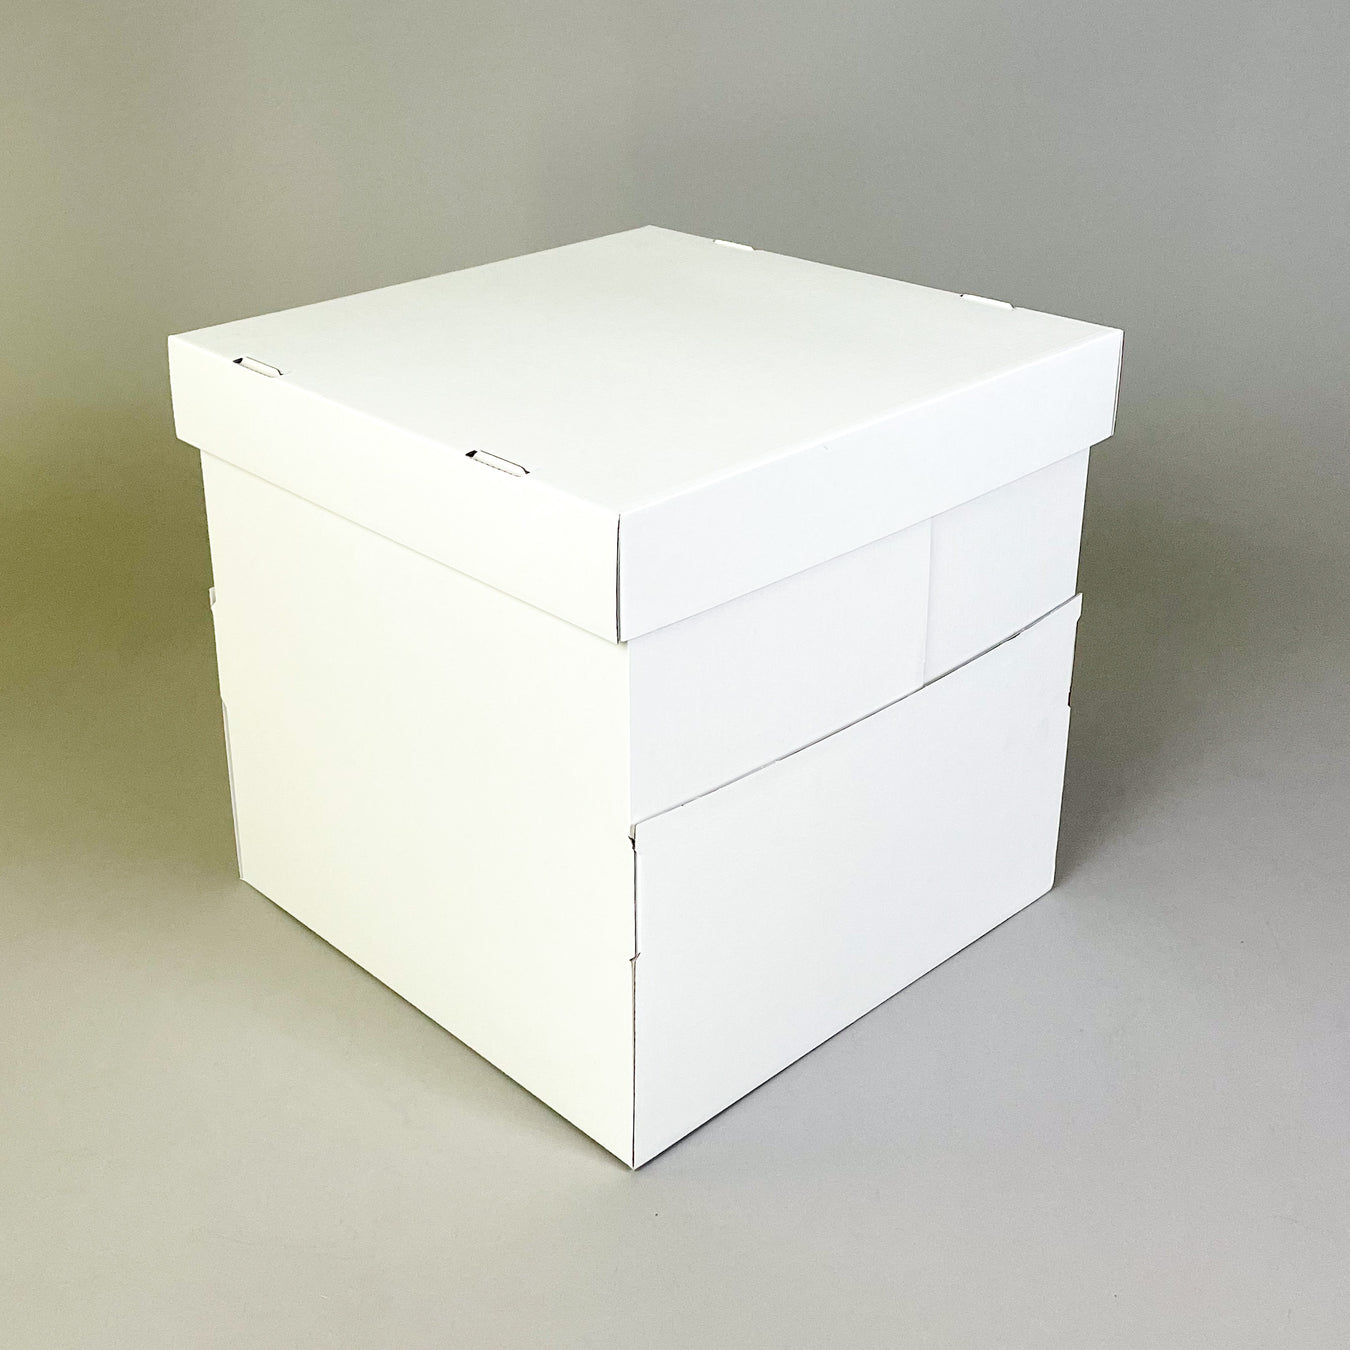 Cake Delivery & Treat Boxes